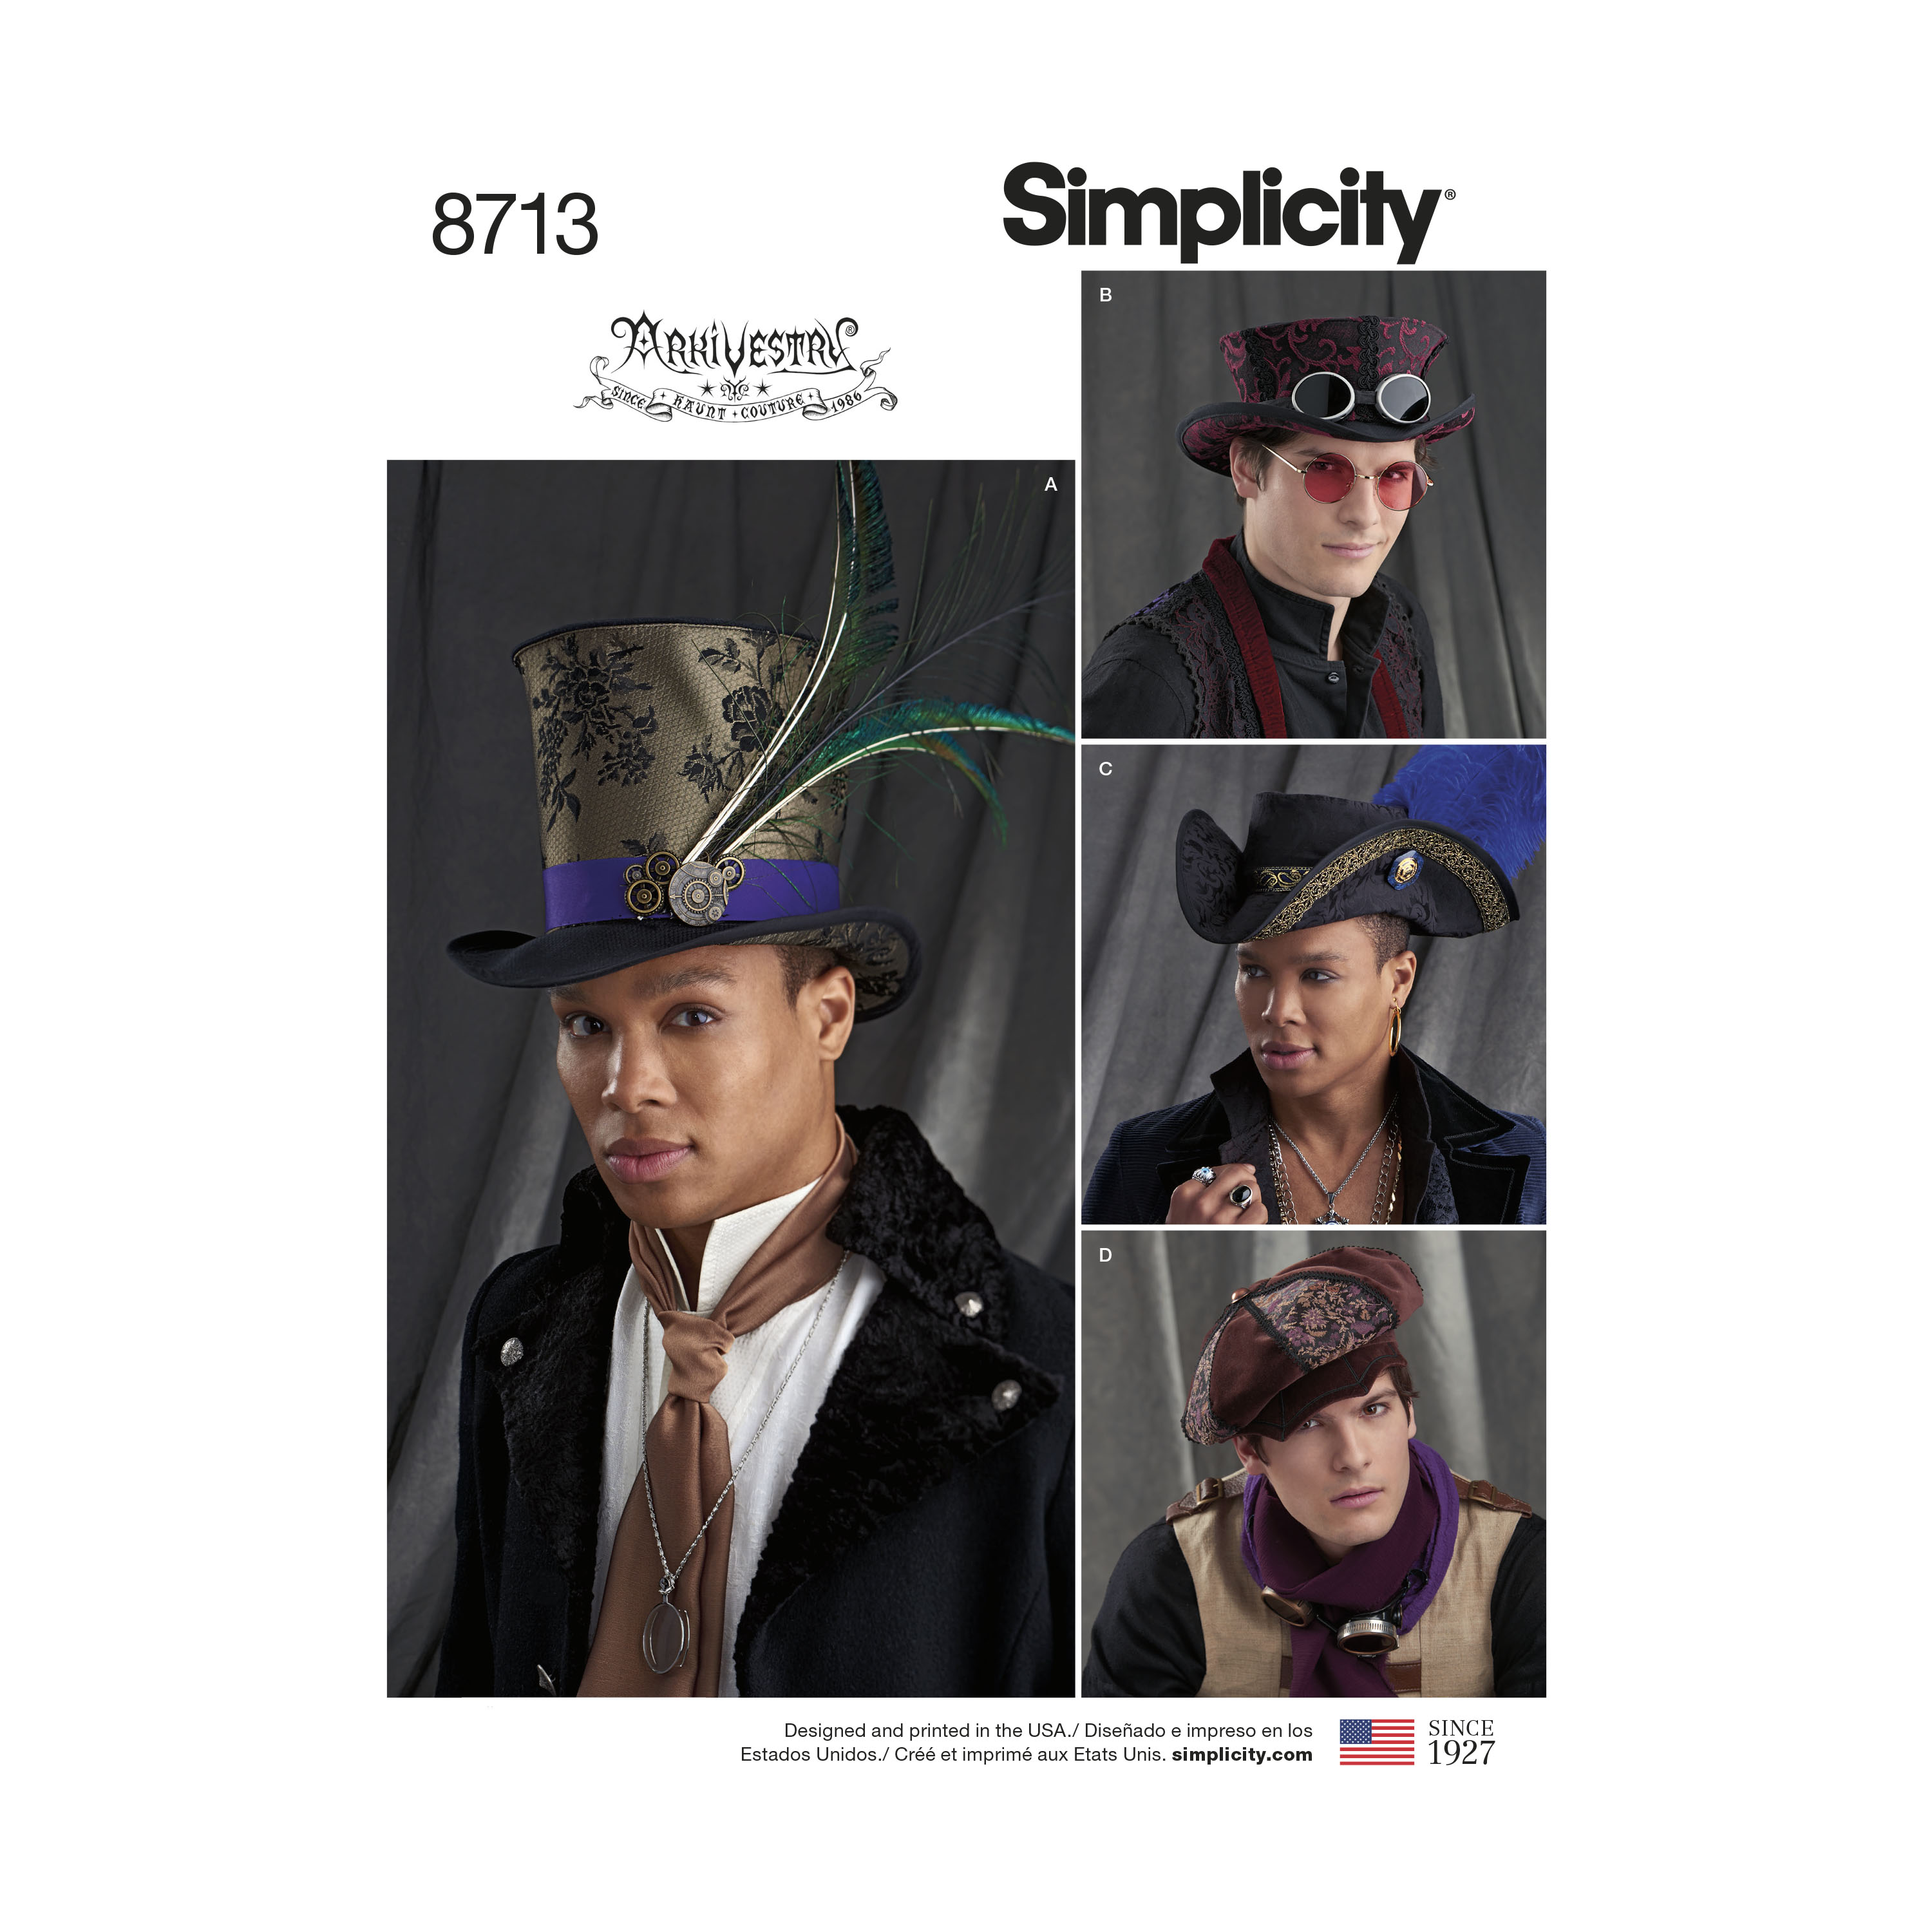 https://images.patternreview.com/sewing/patterns/simplicity/2018/8713/8713.jpg